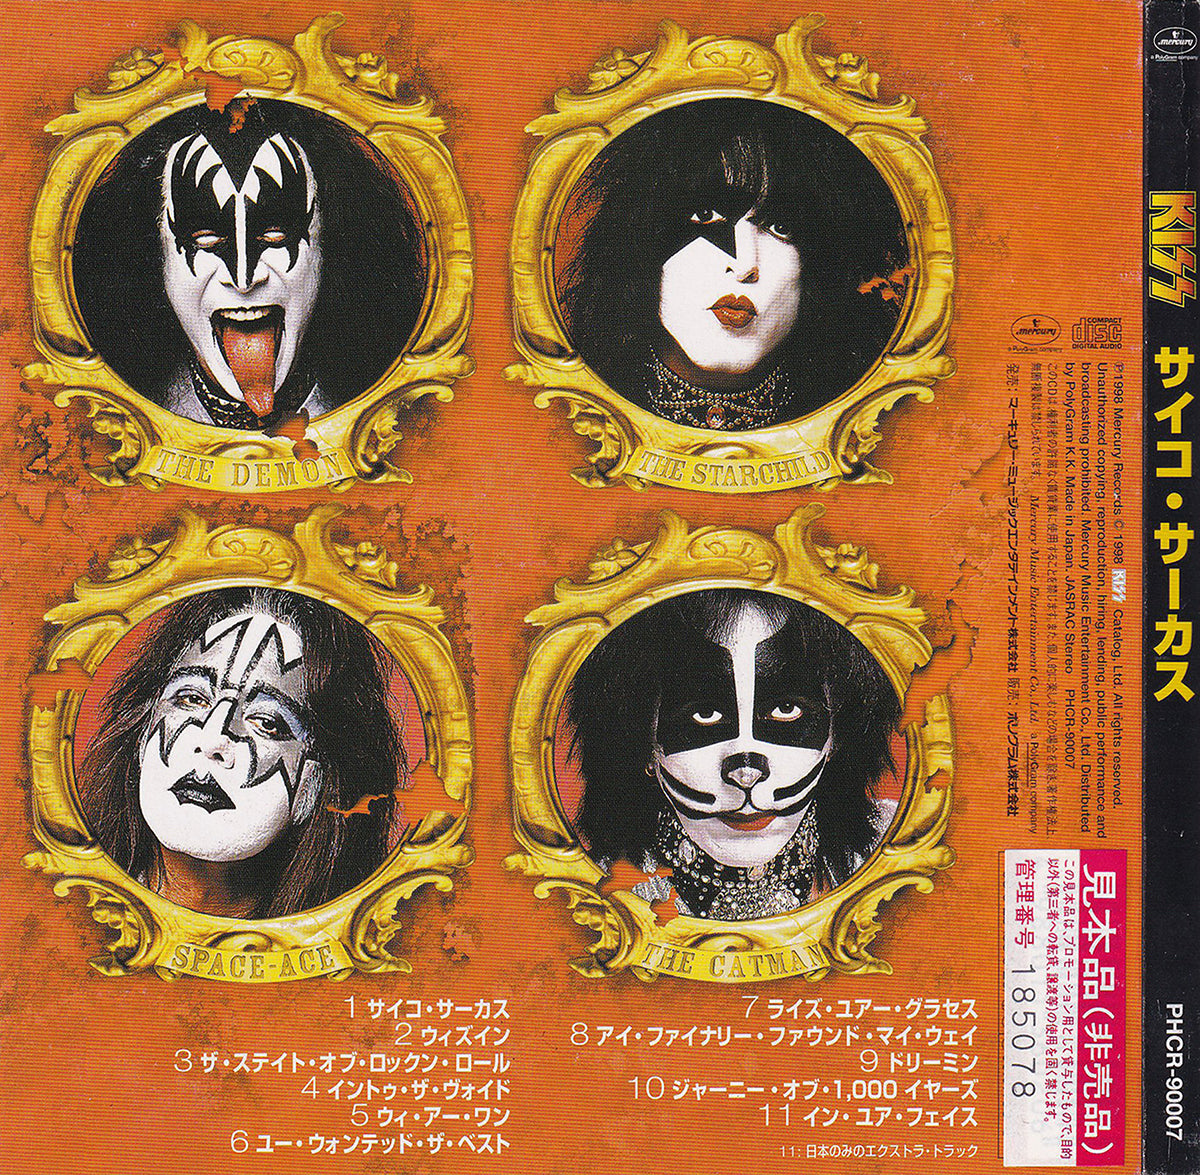 Japanese Psycho Circus CD With Store Display